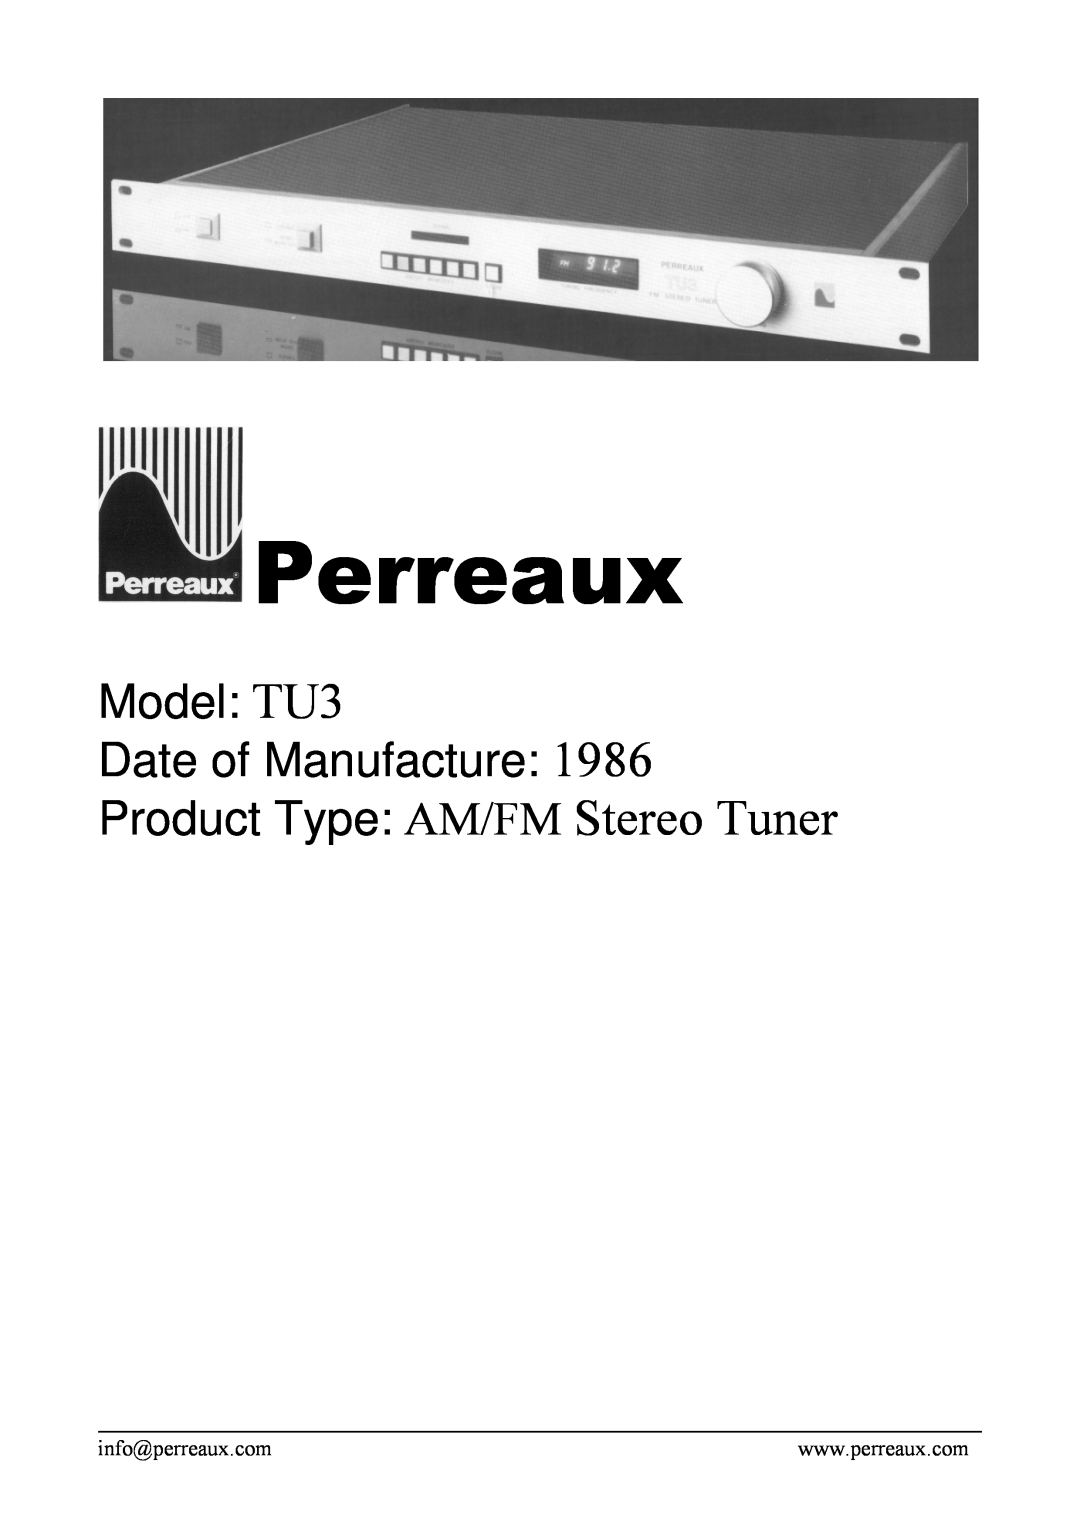 Perreaux manual Perreaux, Model TU3 Date of Manufacture Product Type AM/FM Stereo Tuner 